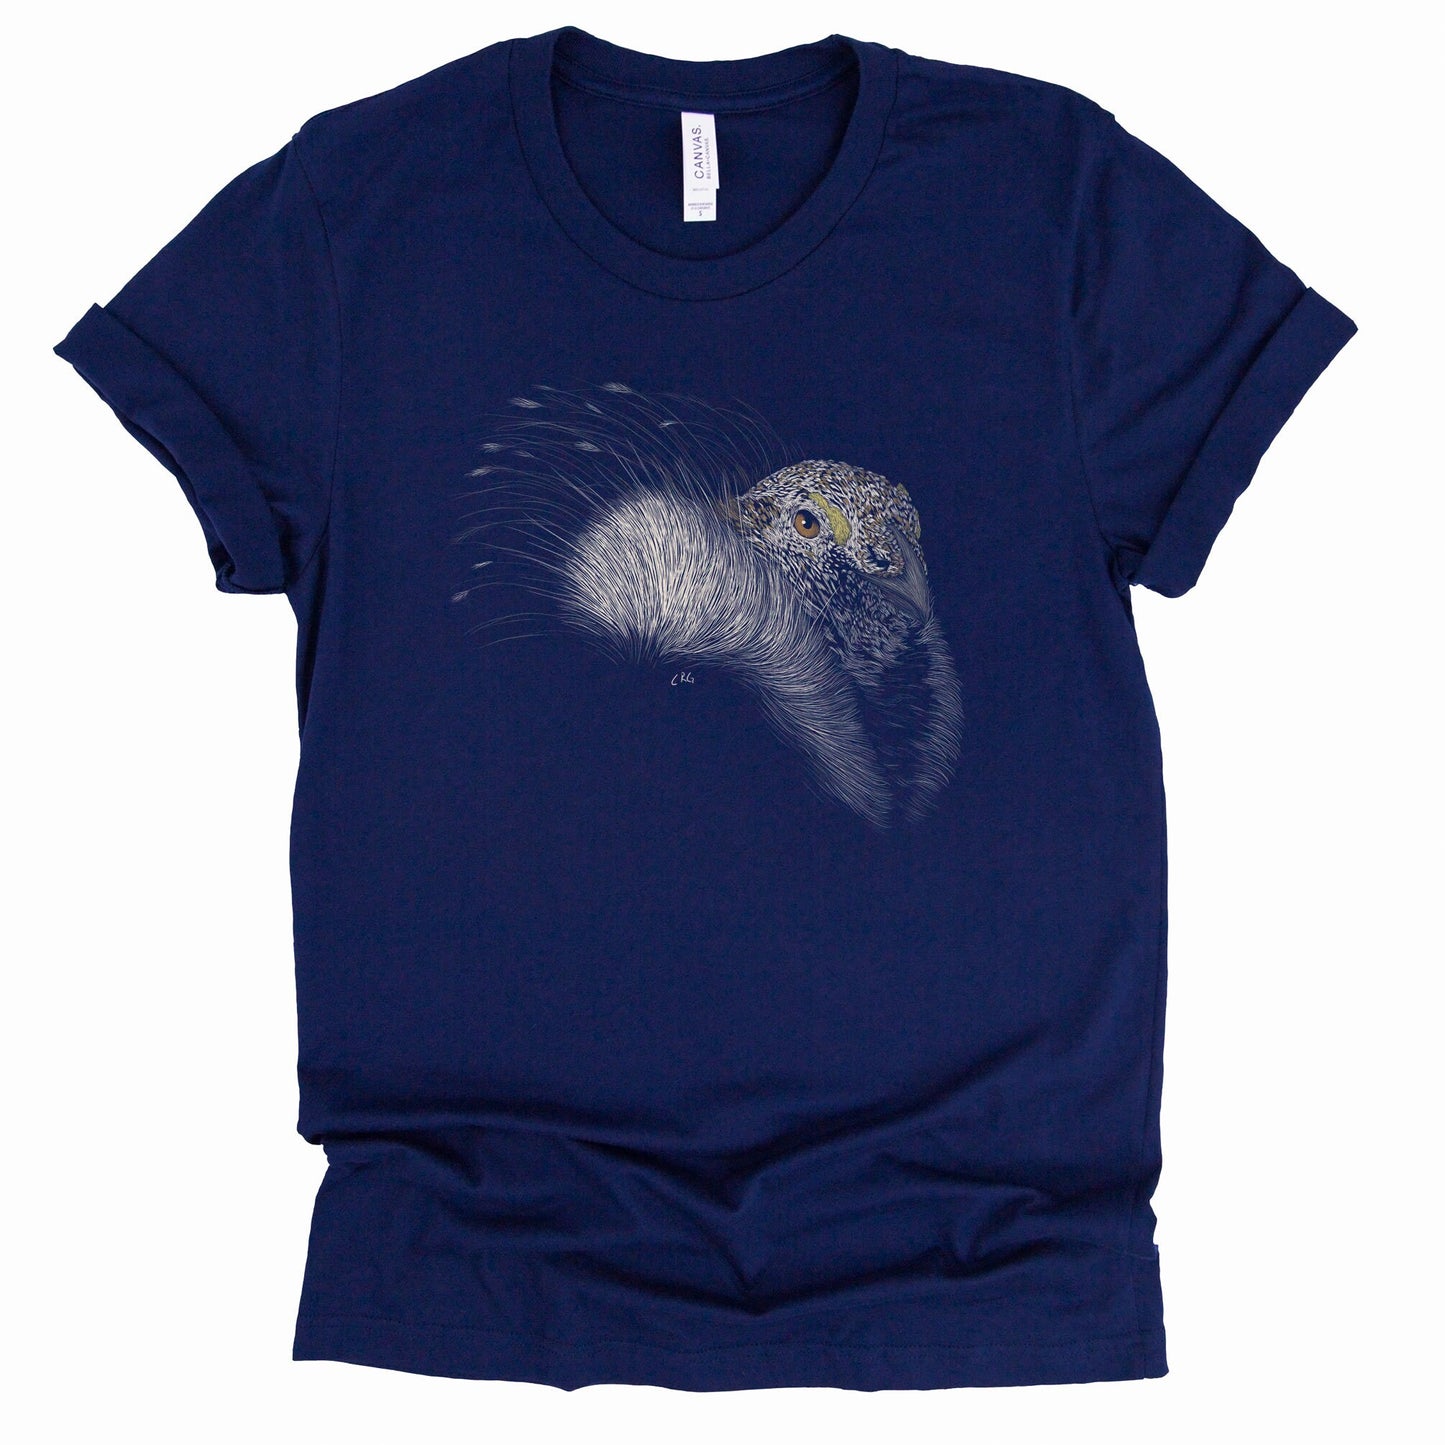 Greater Sage Grouse Shirt